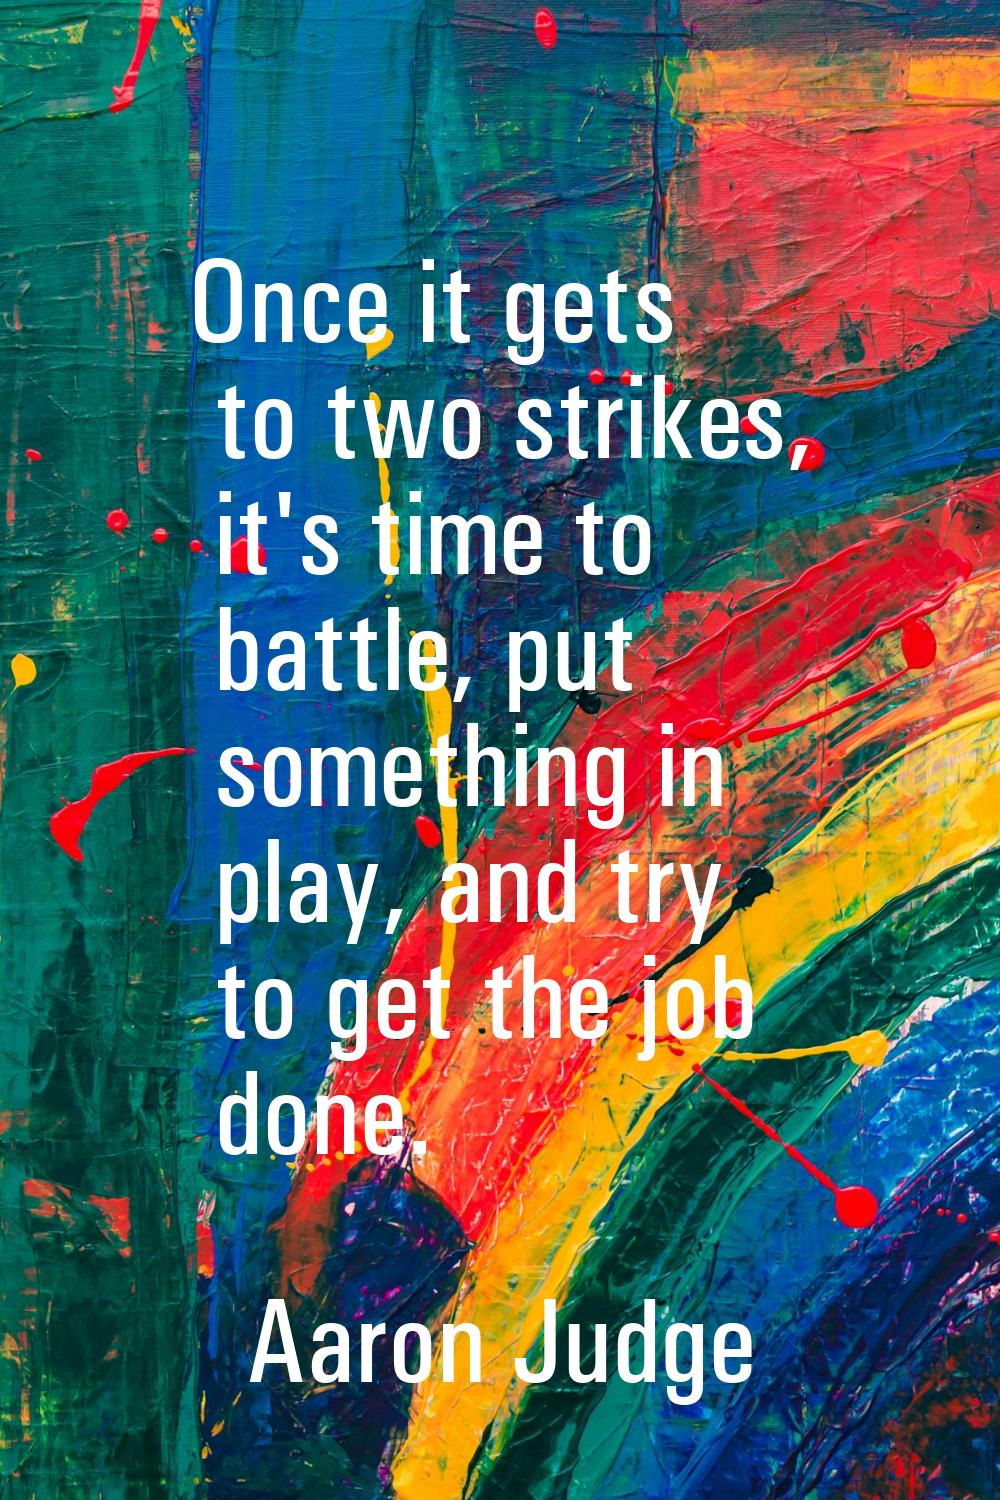 Once it gets to two strikes, it's time to battle, put something in play, and try to get the job don